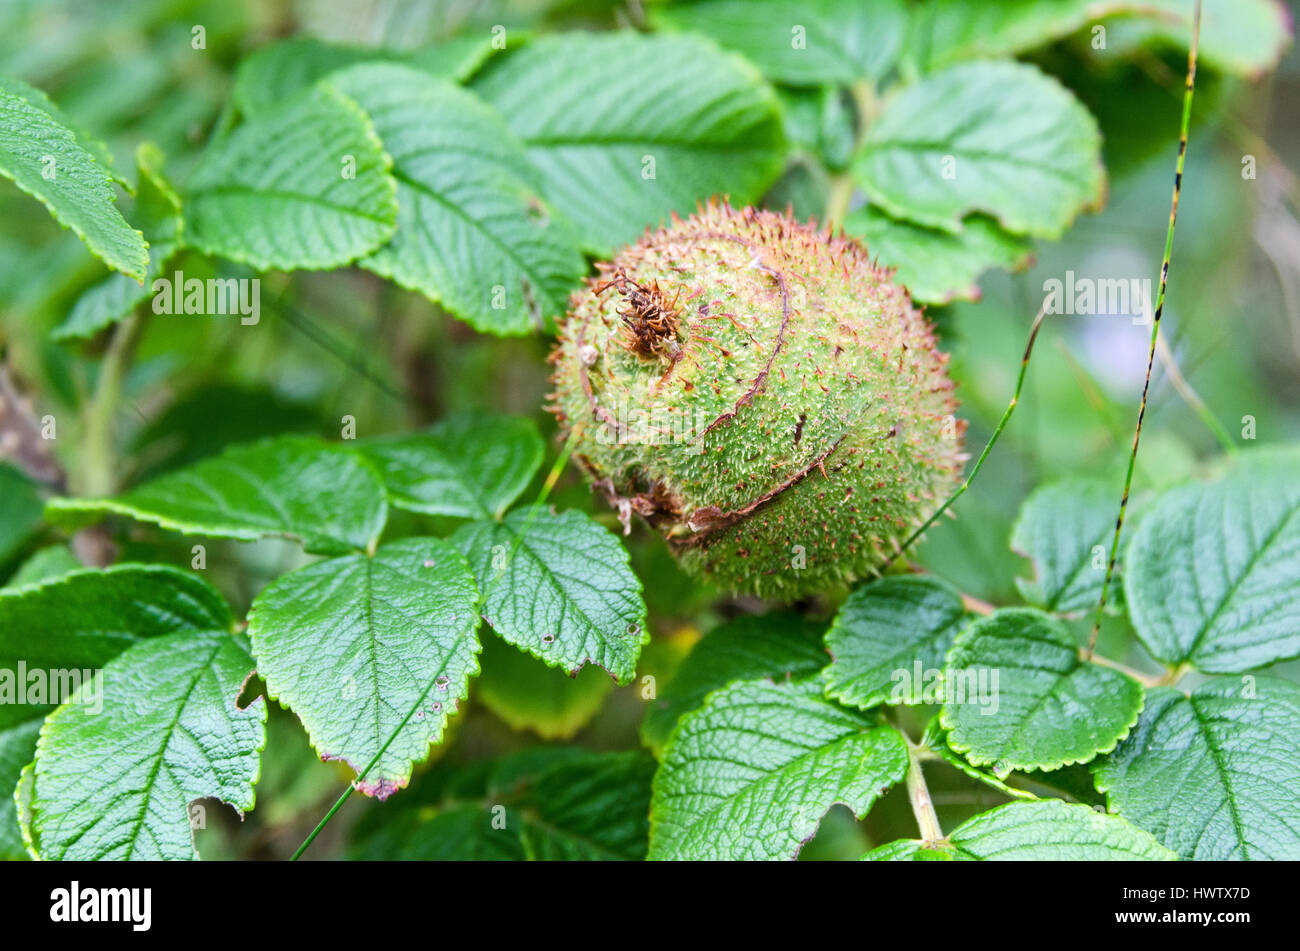 Galls formed by the larvae of the Spiny Rose Stem Gall Wasp on Rugosa rose plants, Islesford, Maine. Stock Photo